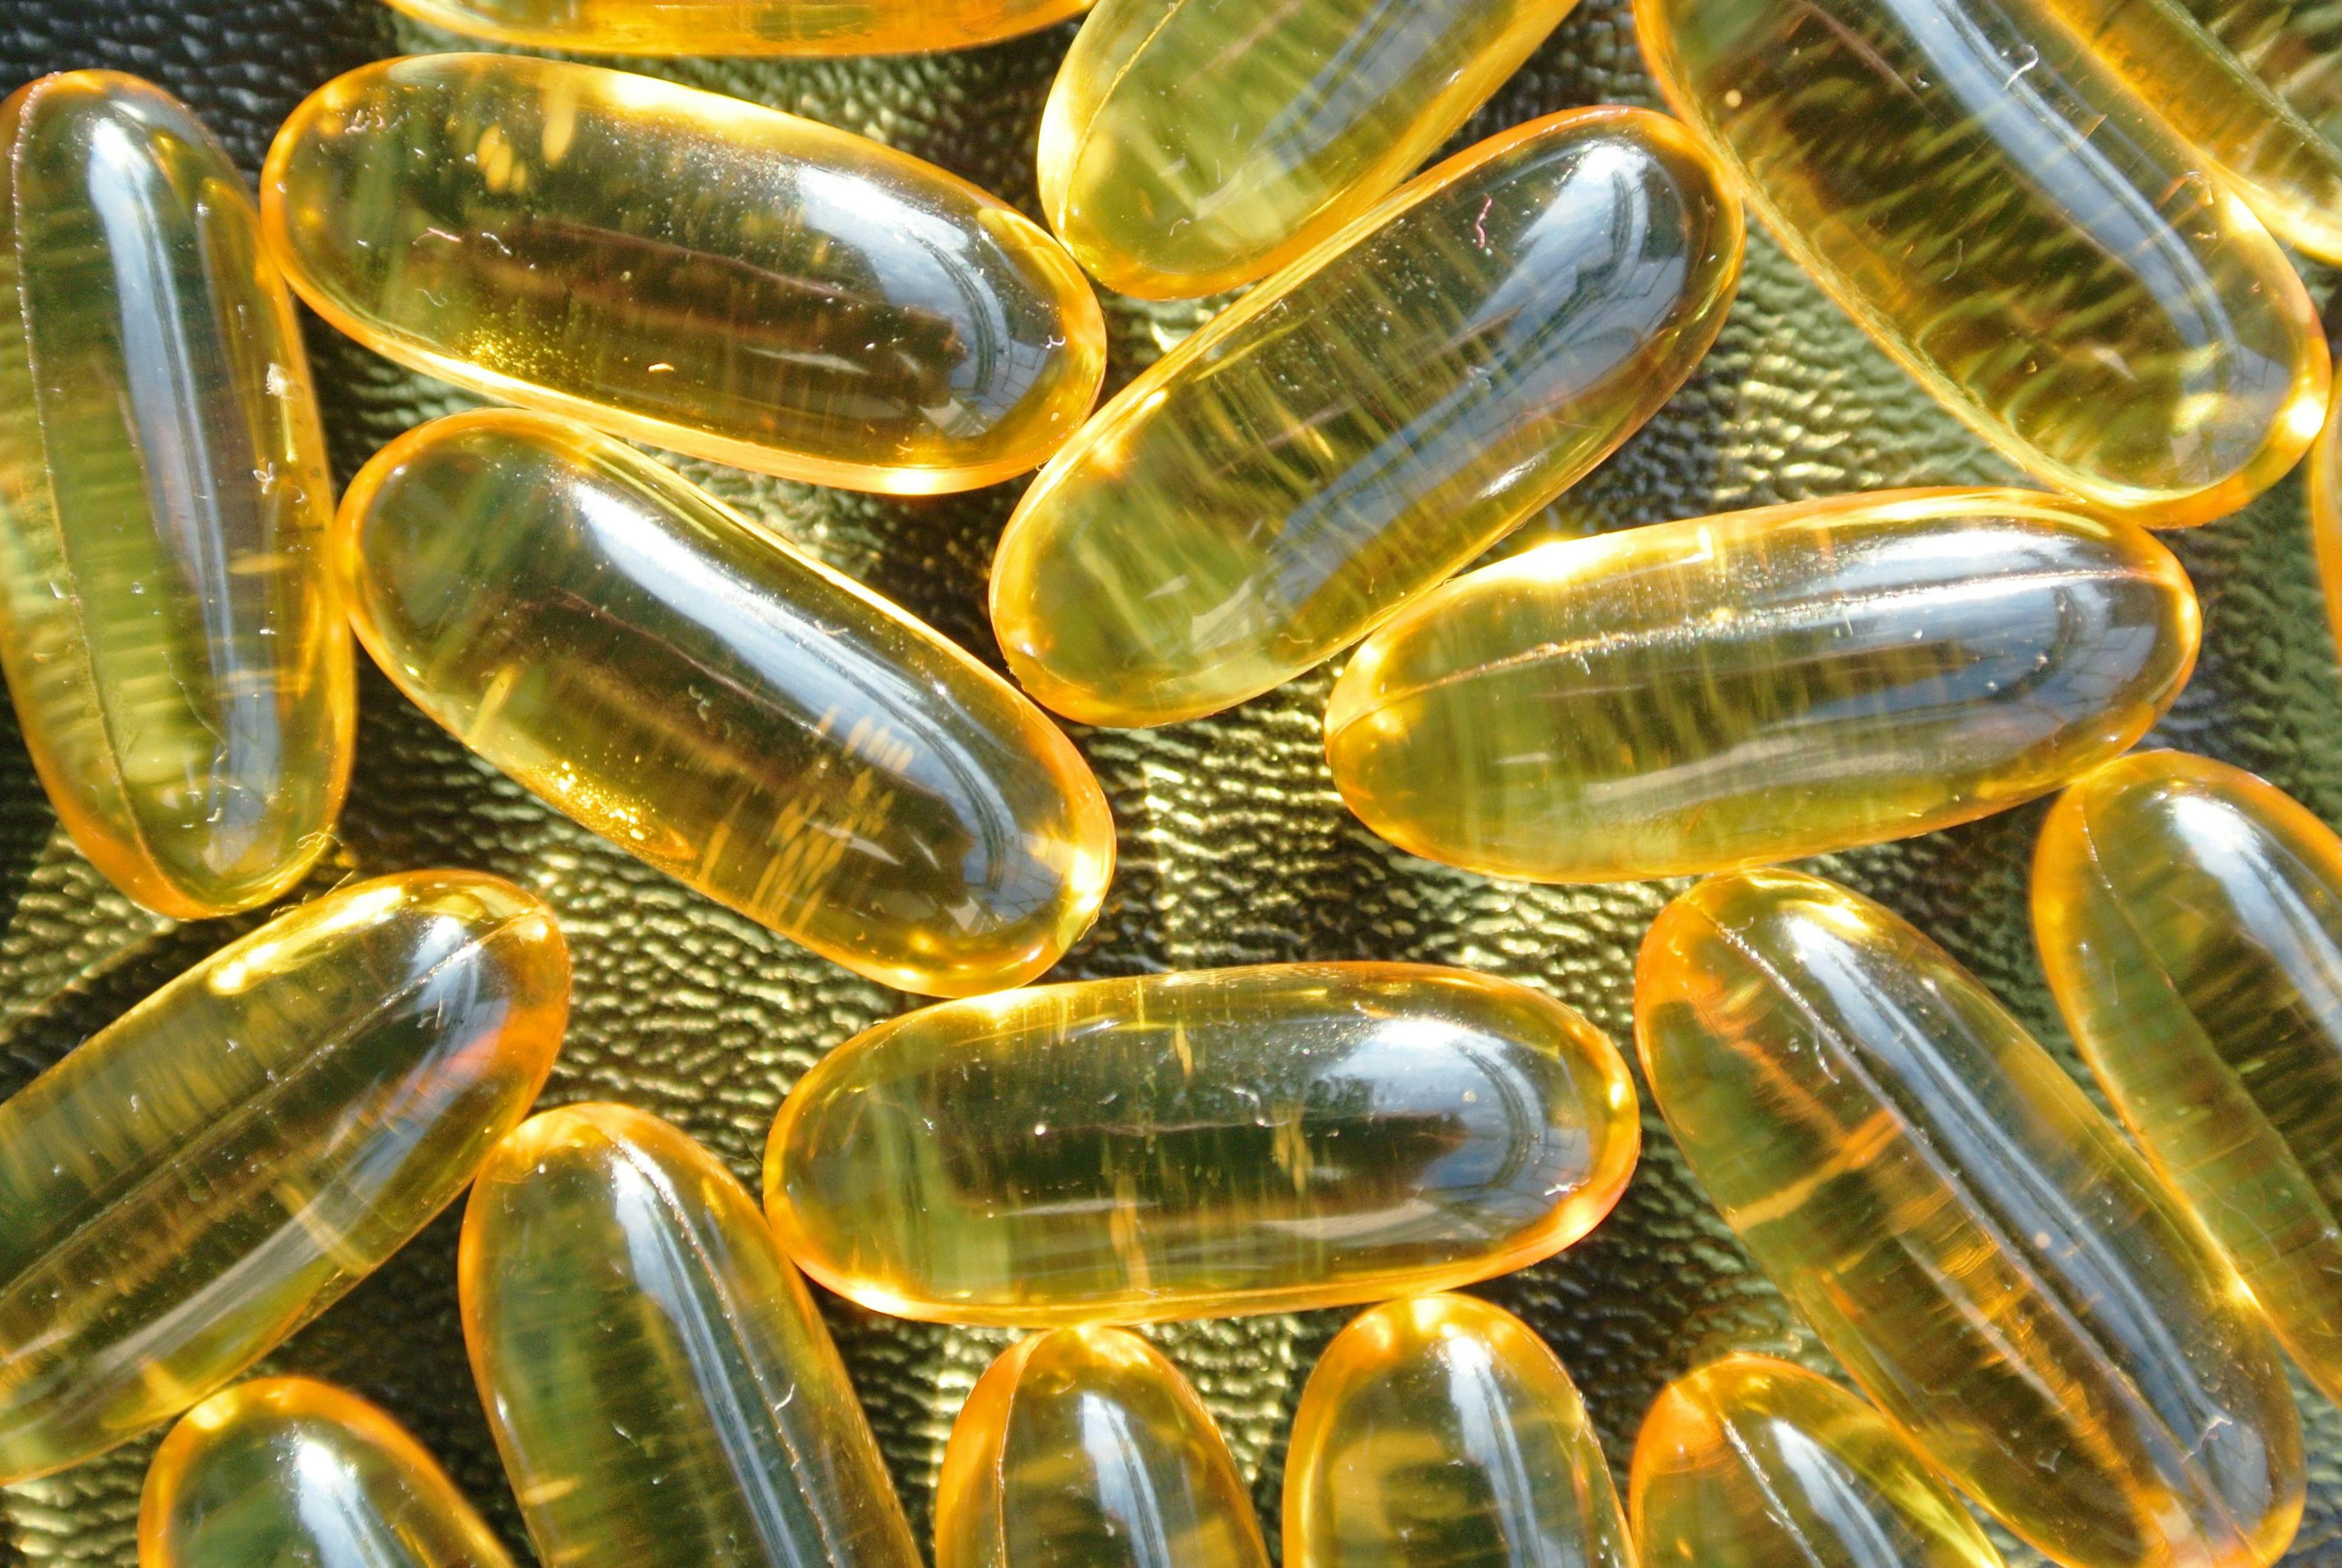 Omega-3 fish oil supplements